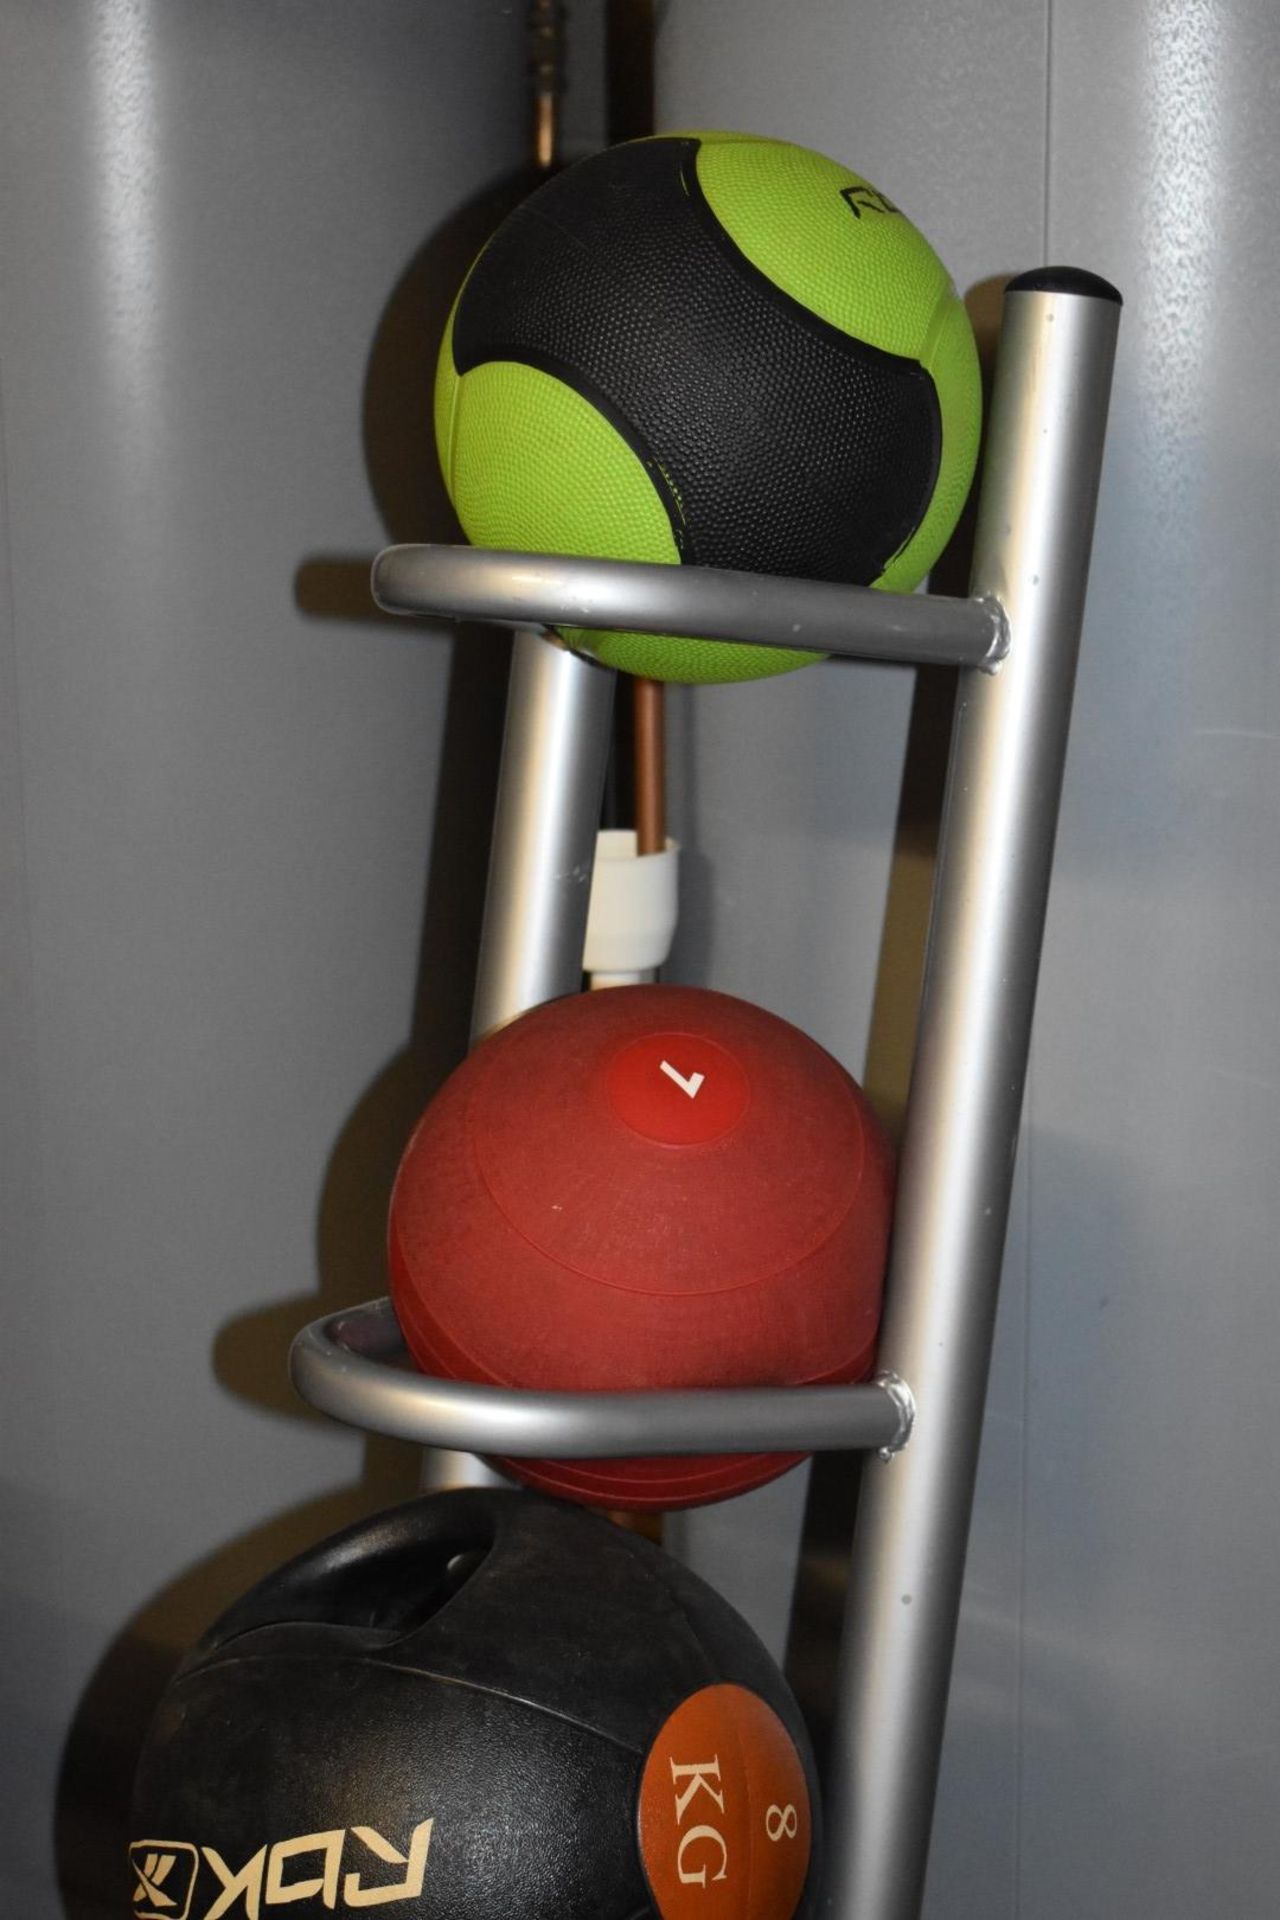 5 x Fitness Medicine Balls - Features Jordon Slam Ball and Reebok - Includes Ball Rack - CL546 - - Image 2 of 10